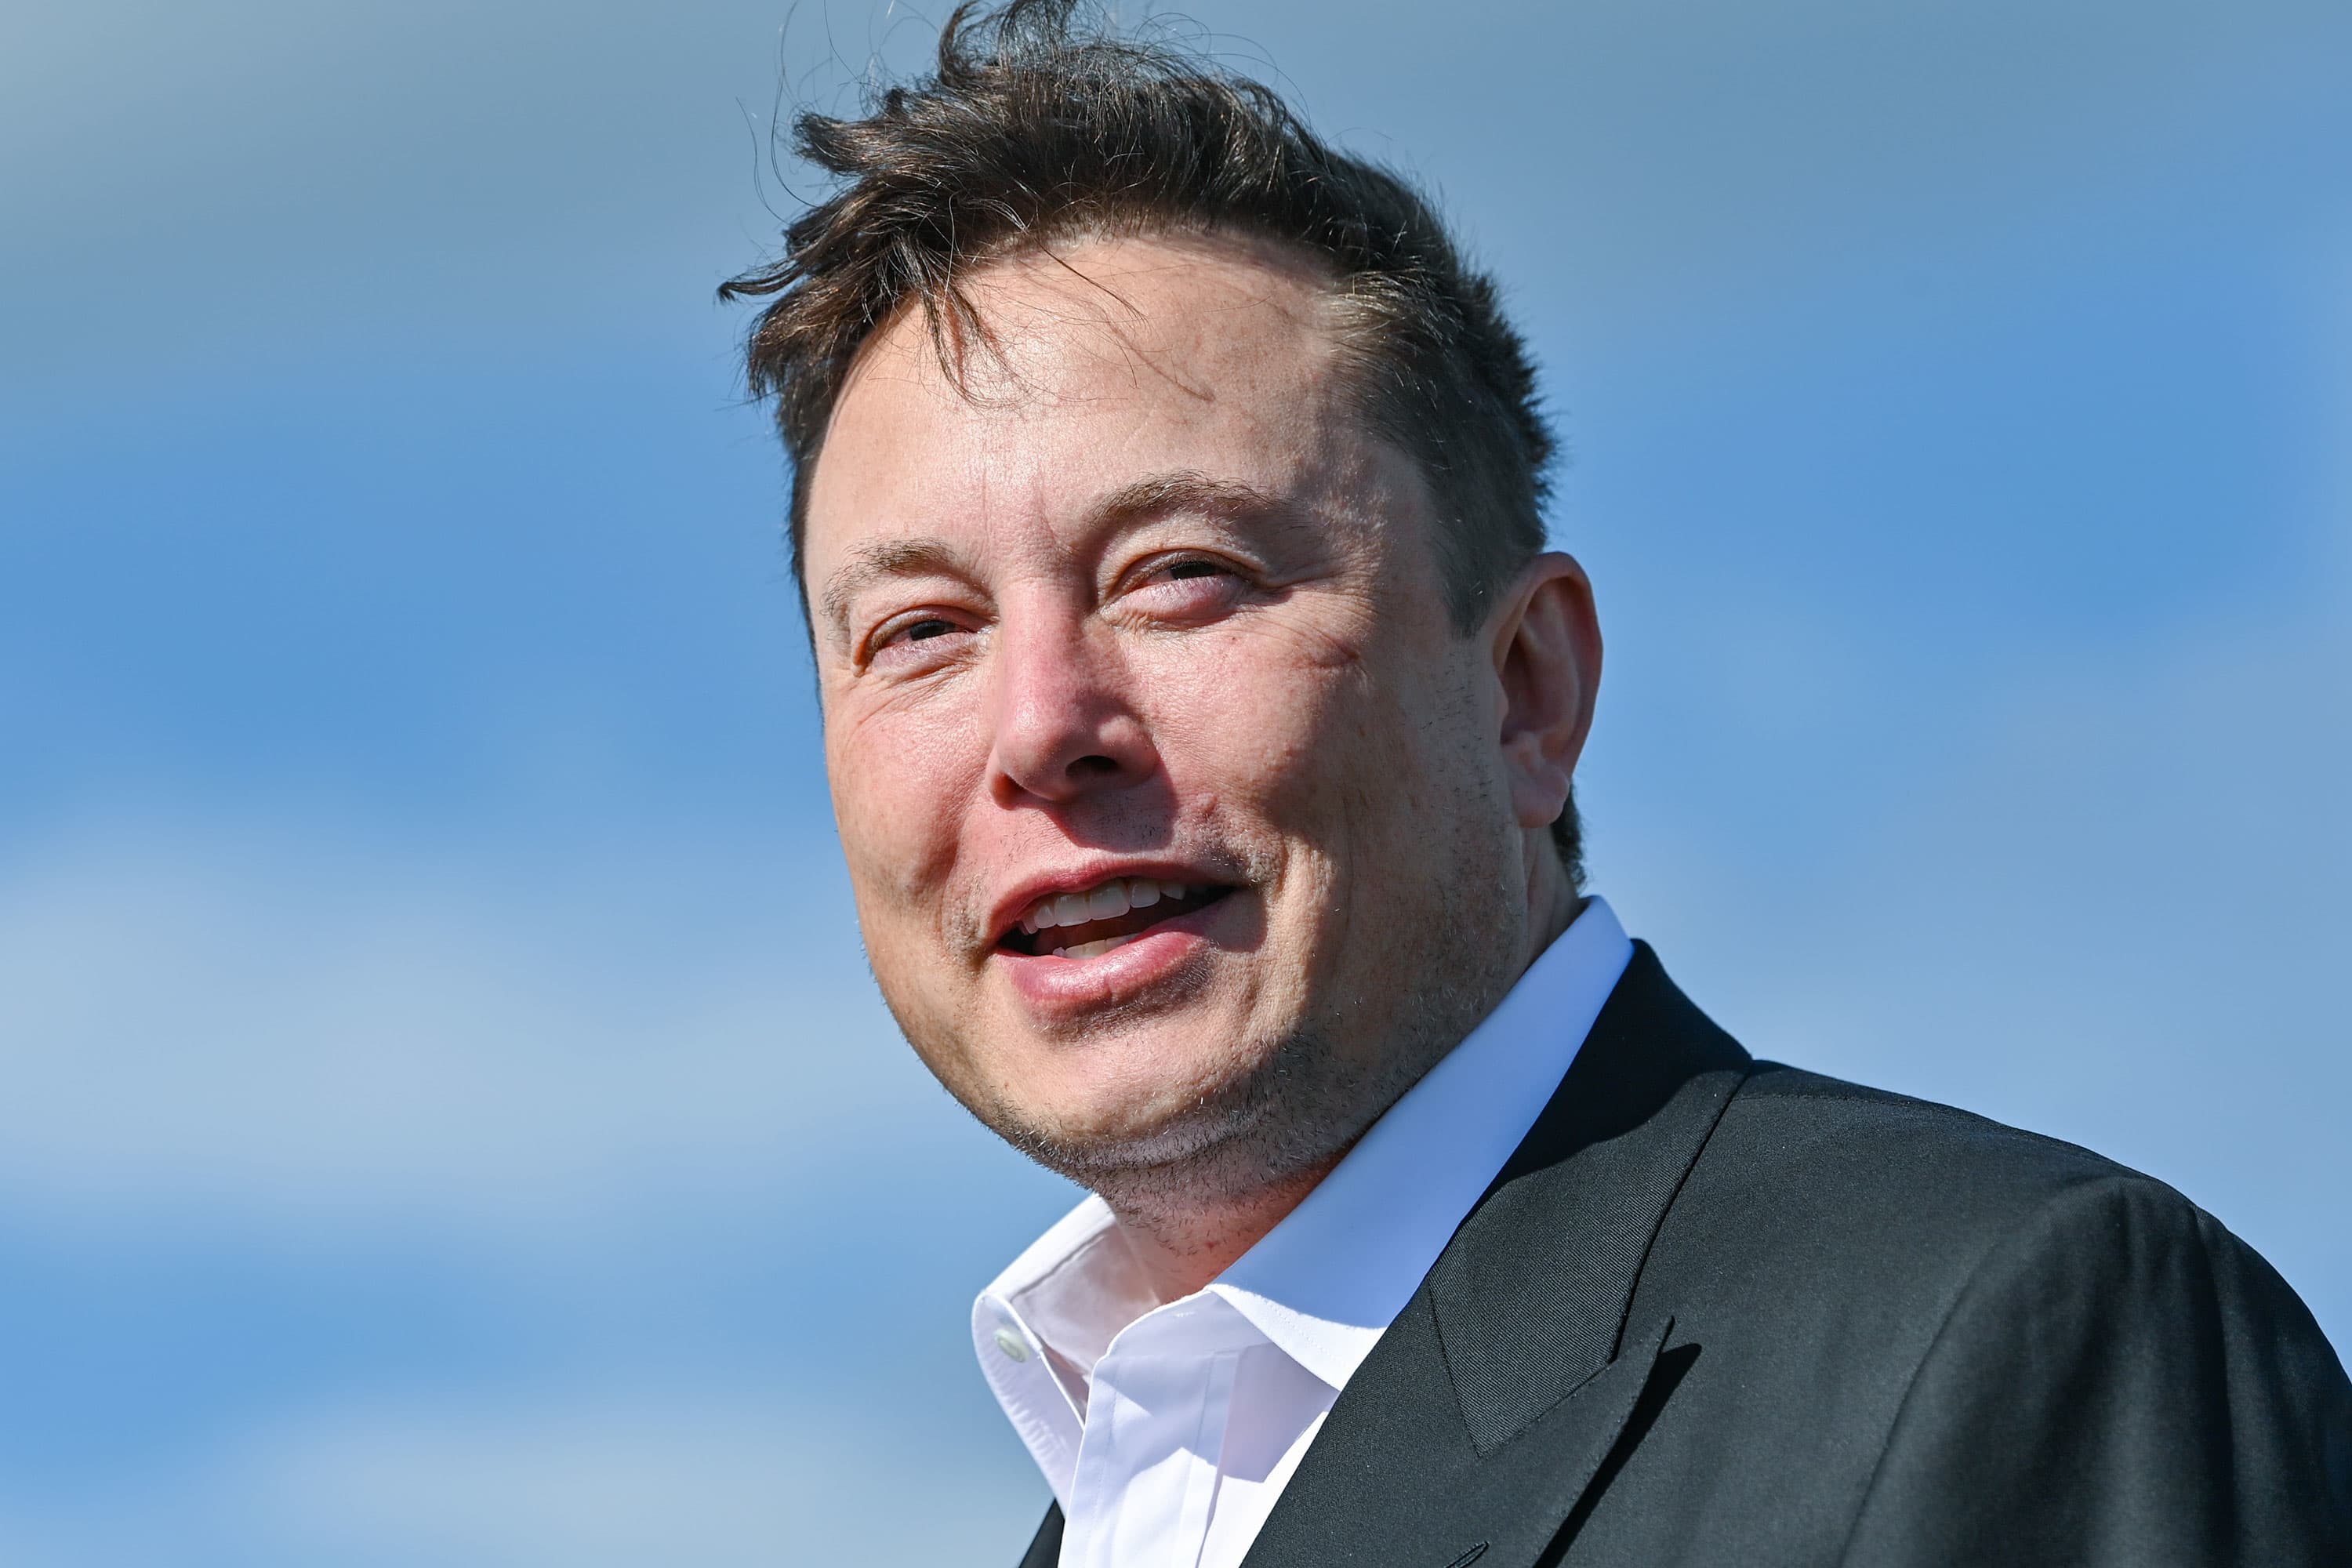 Elon Musk is now the richest person in the world, passing ...